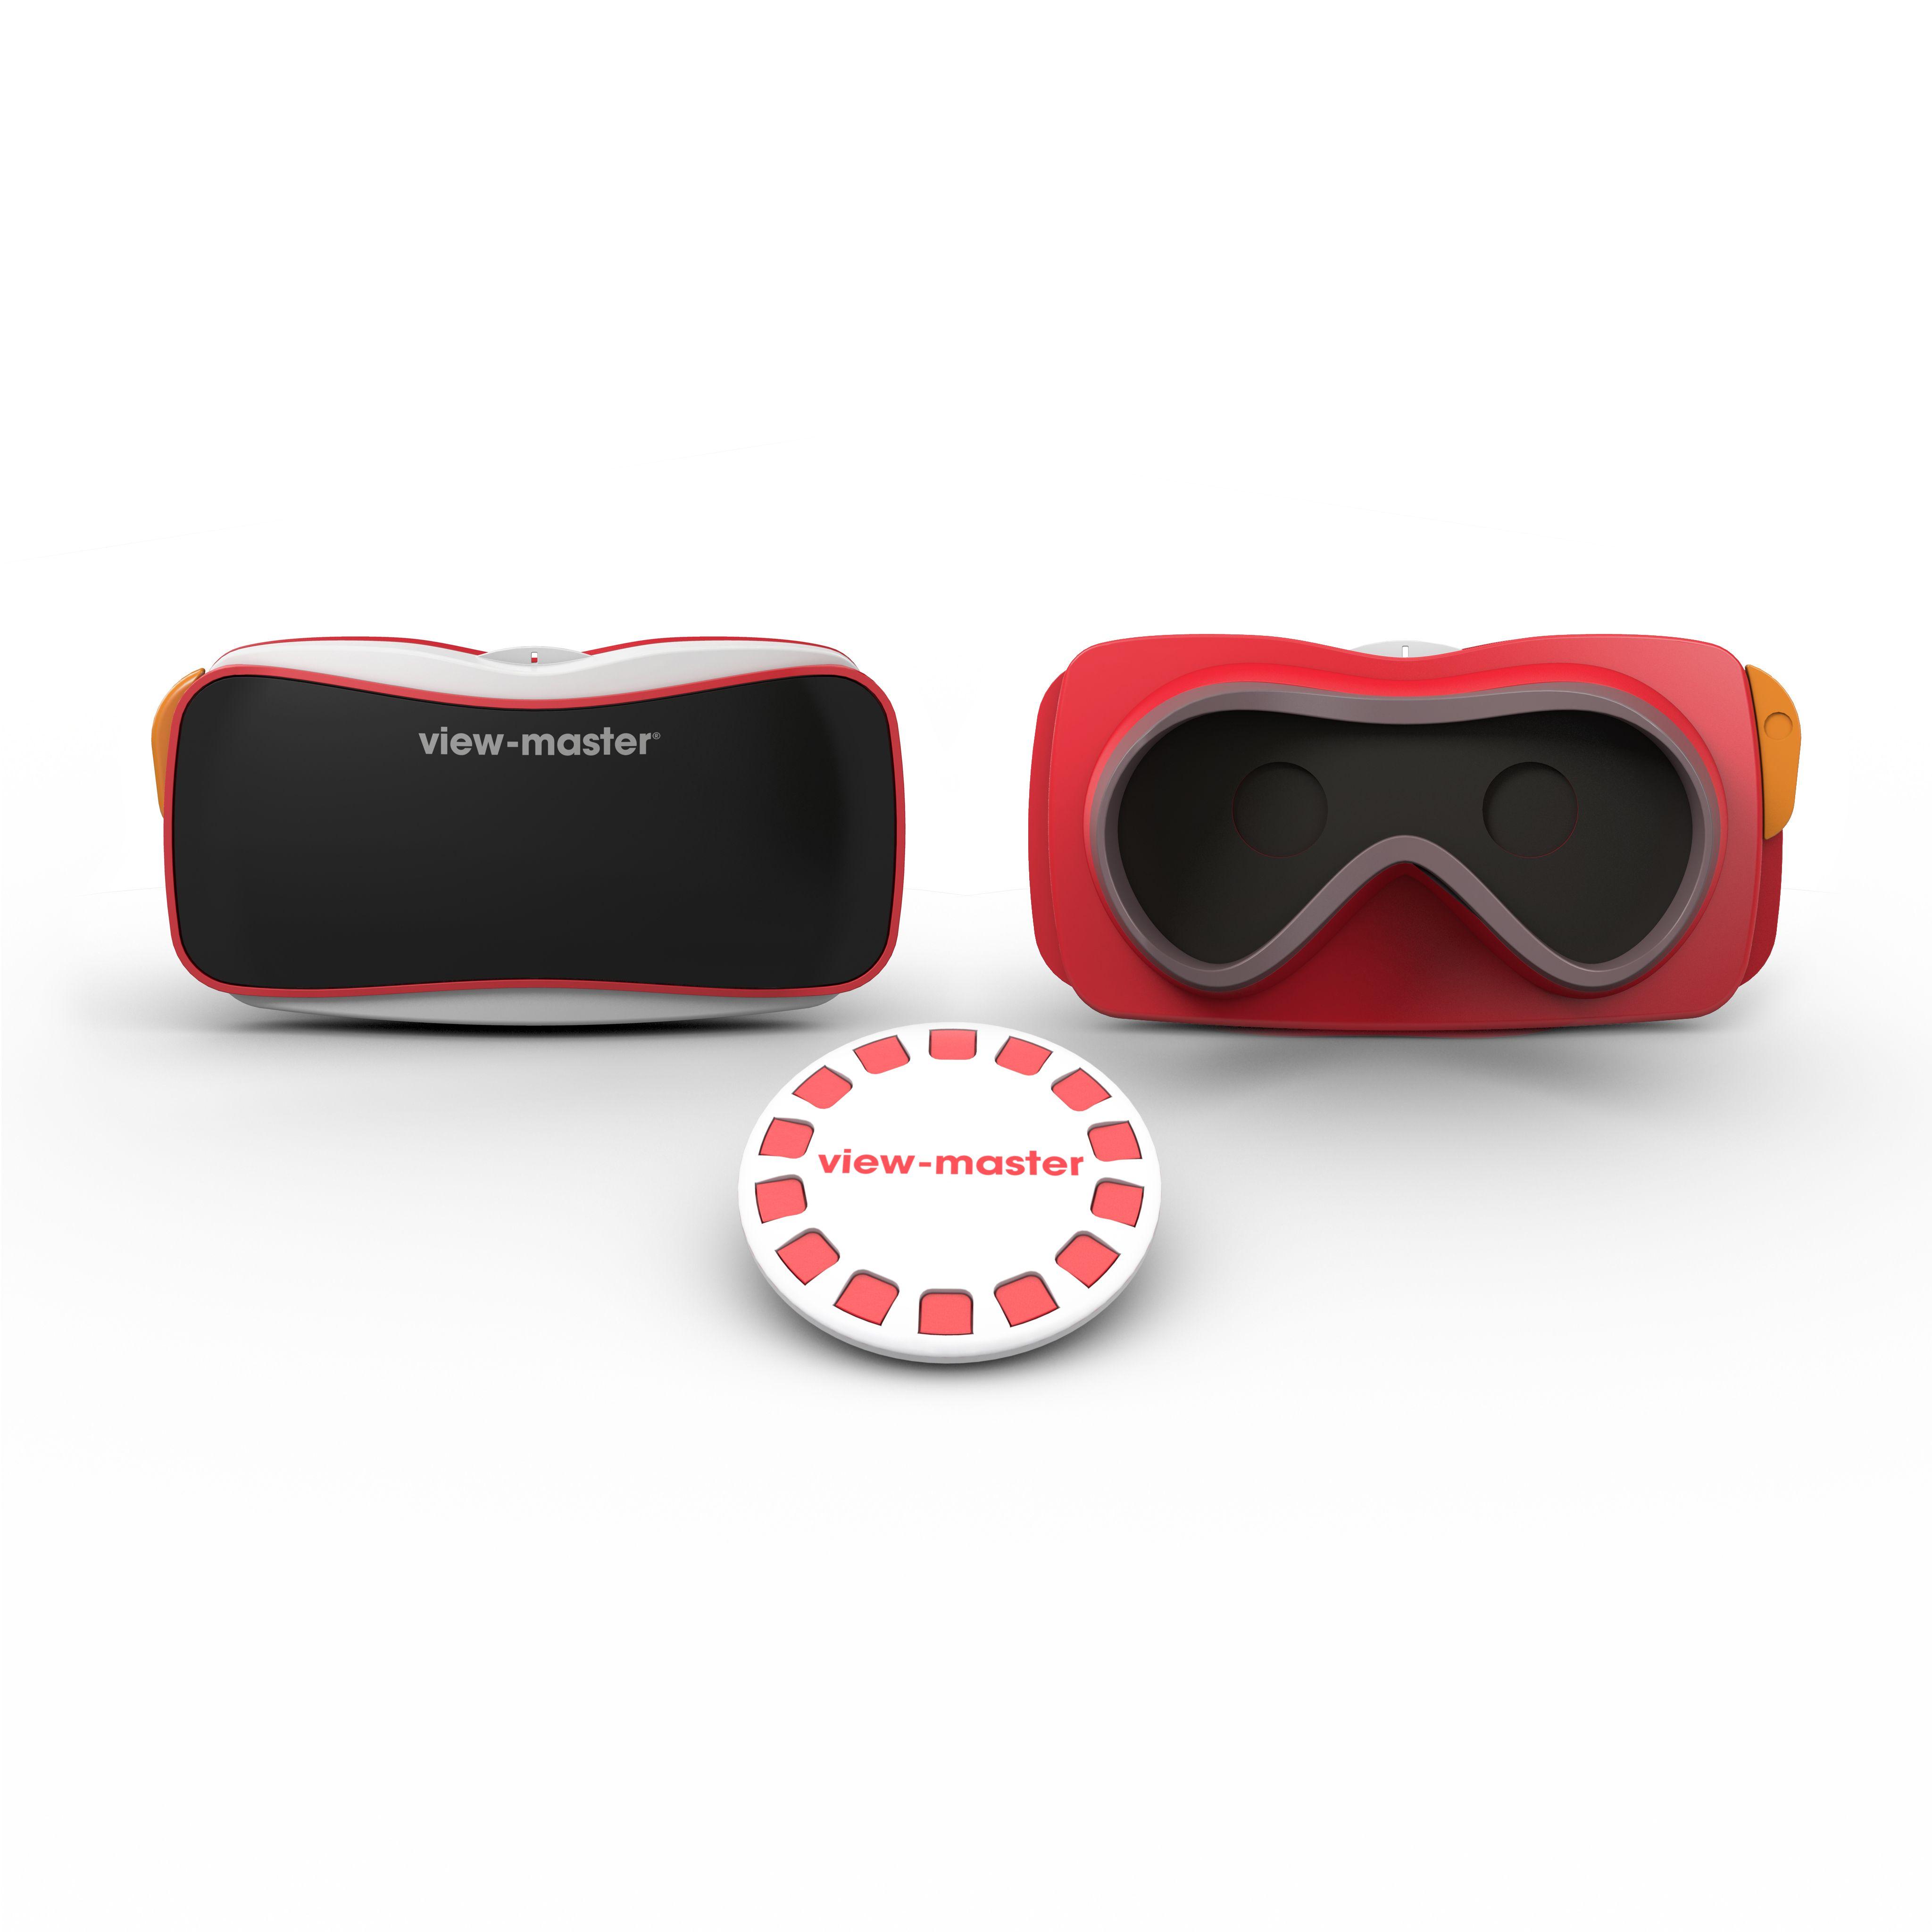 View-Master Logo - Why Mattel's New View-Master Is a Disaster | Time